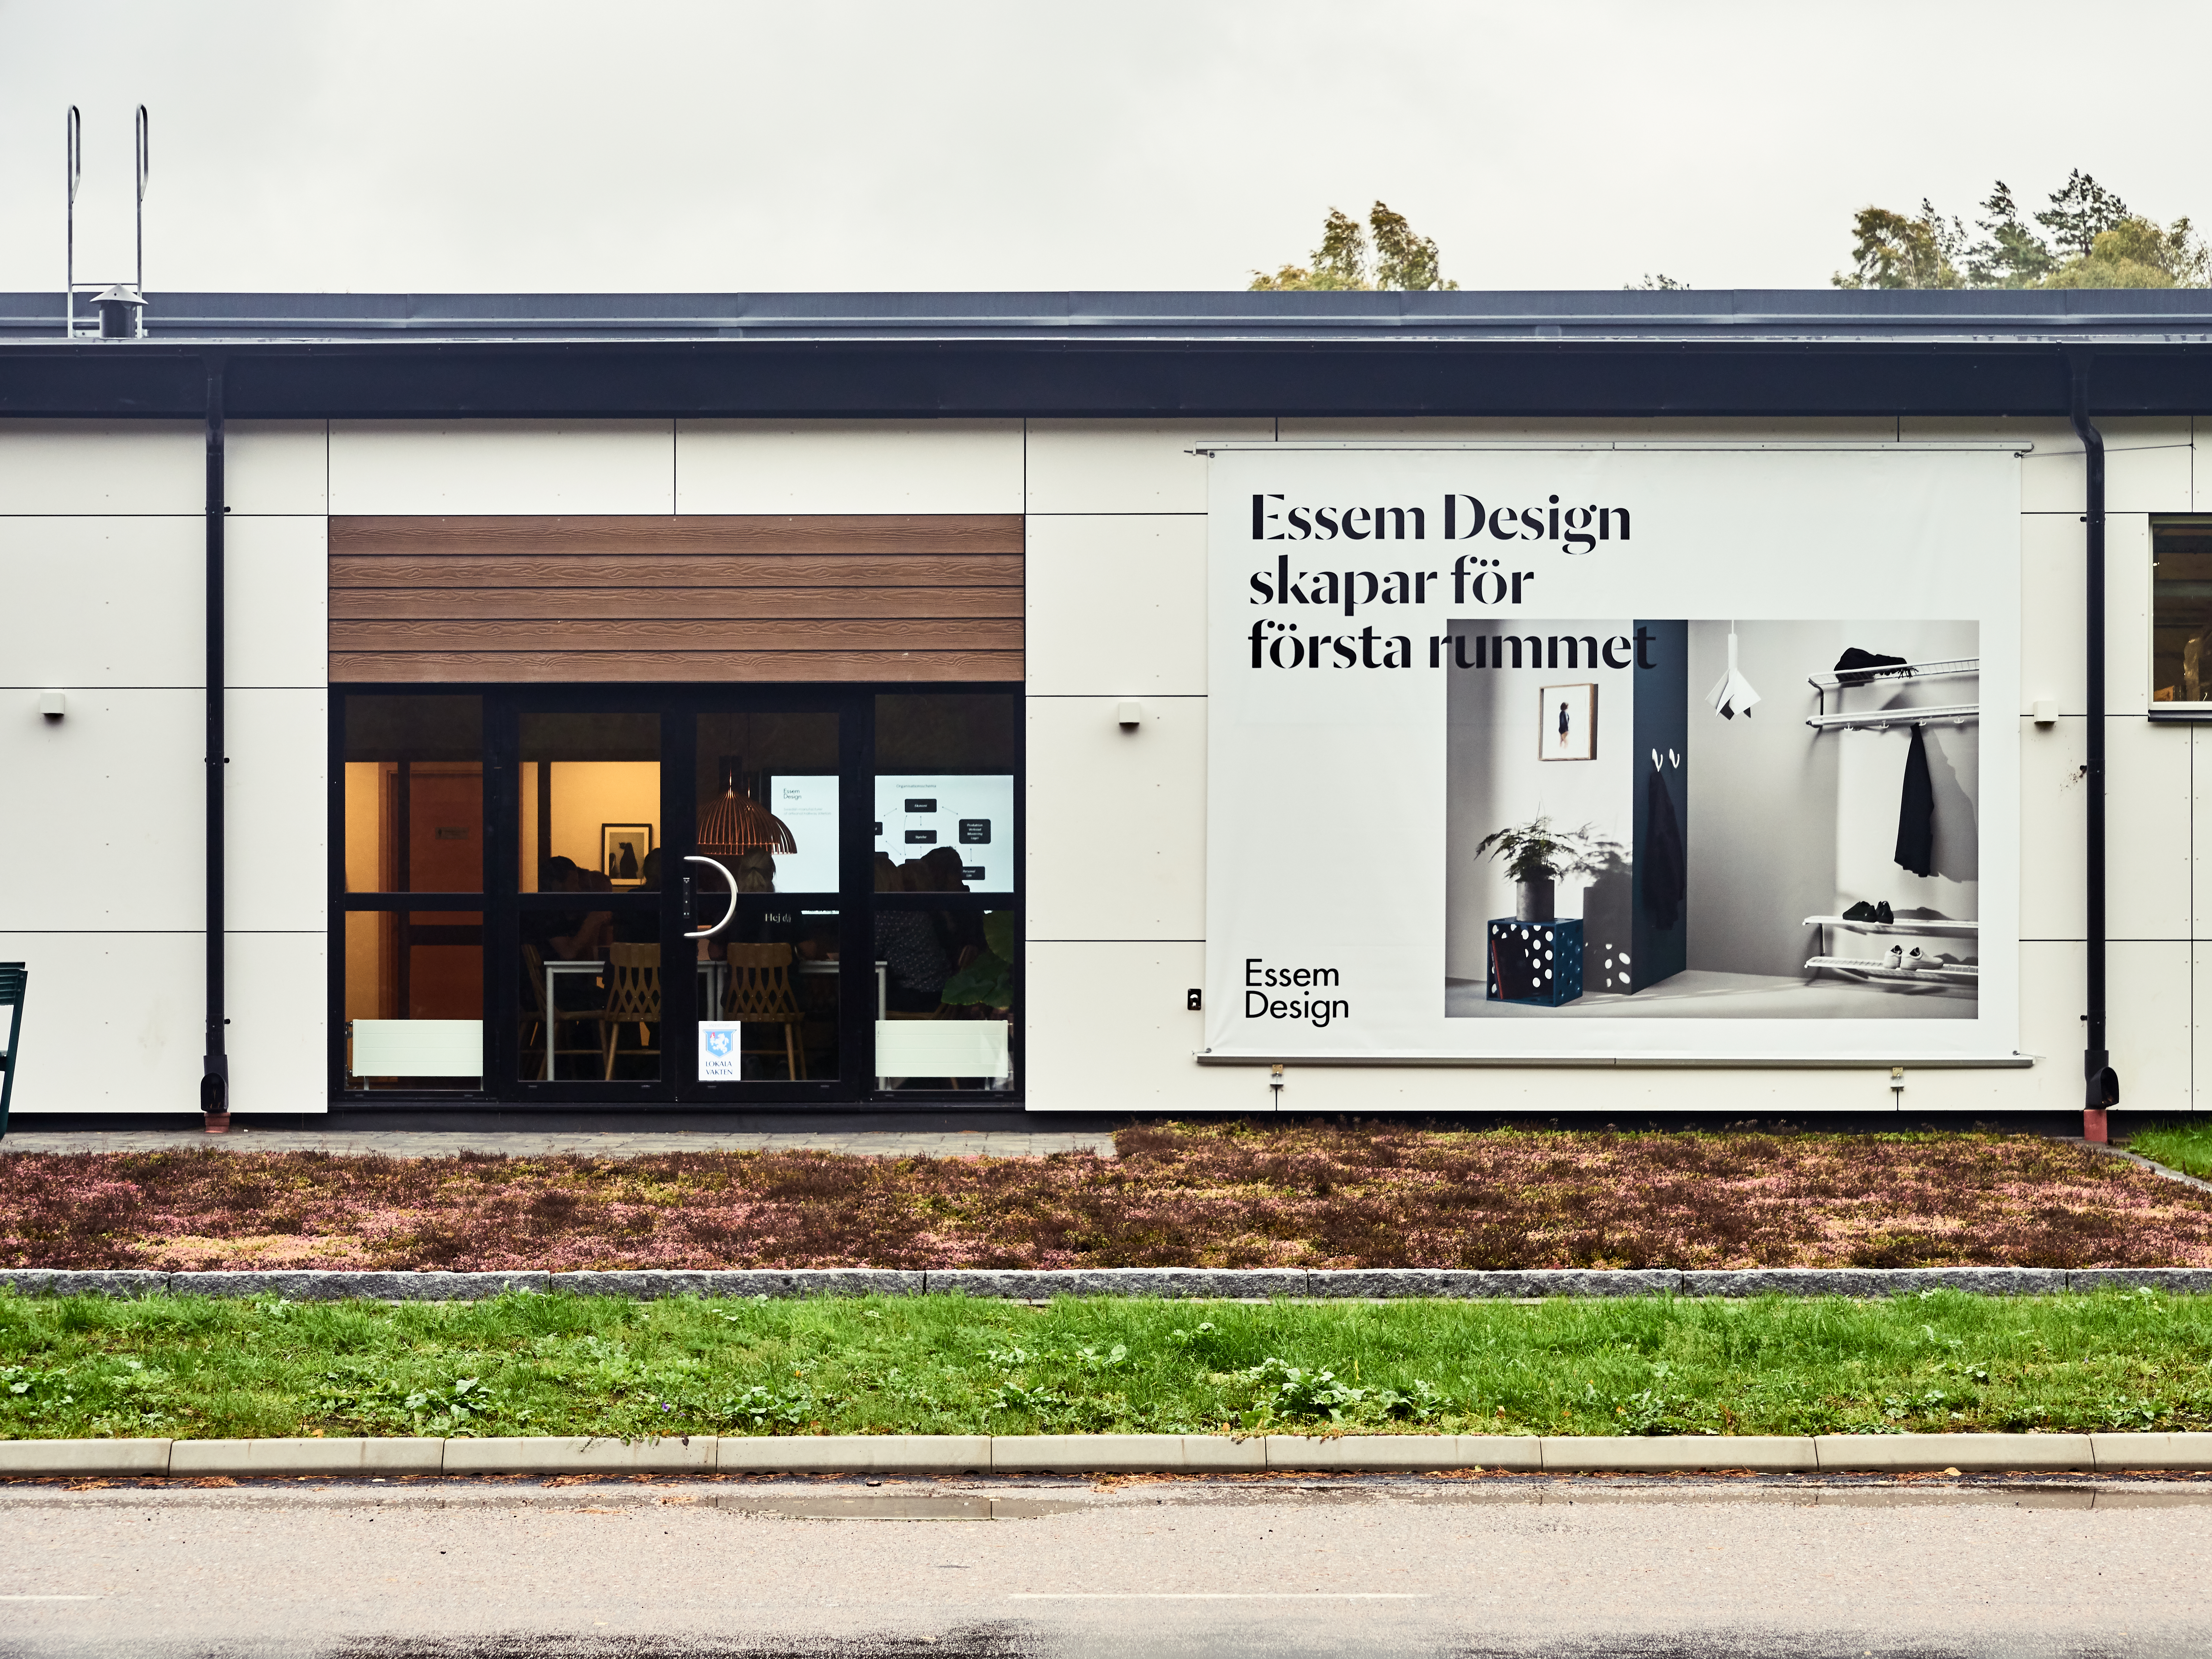 Essem Design creates function for the first room